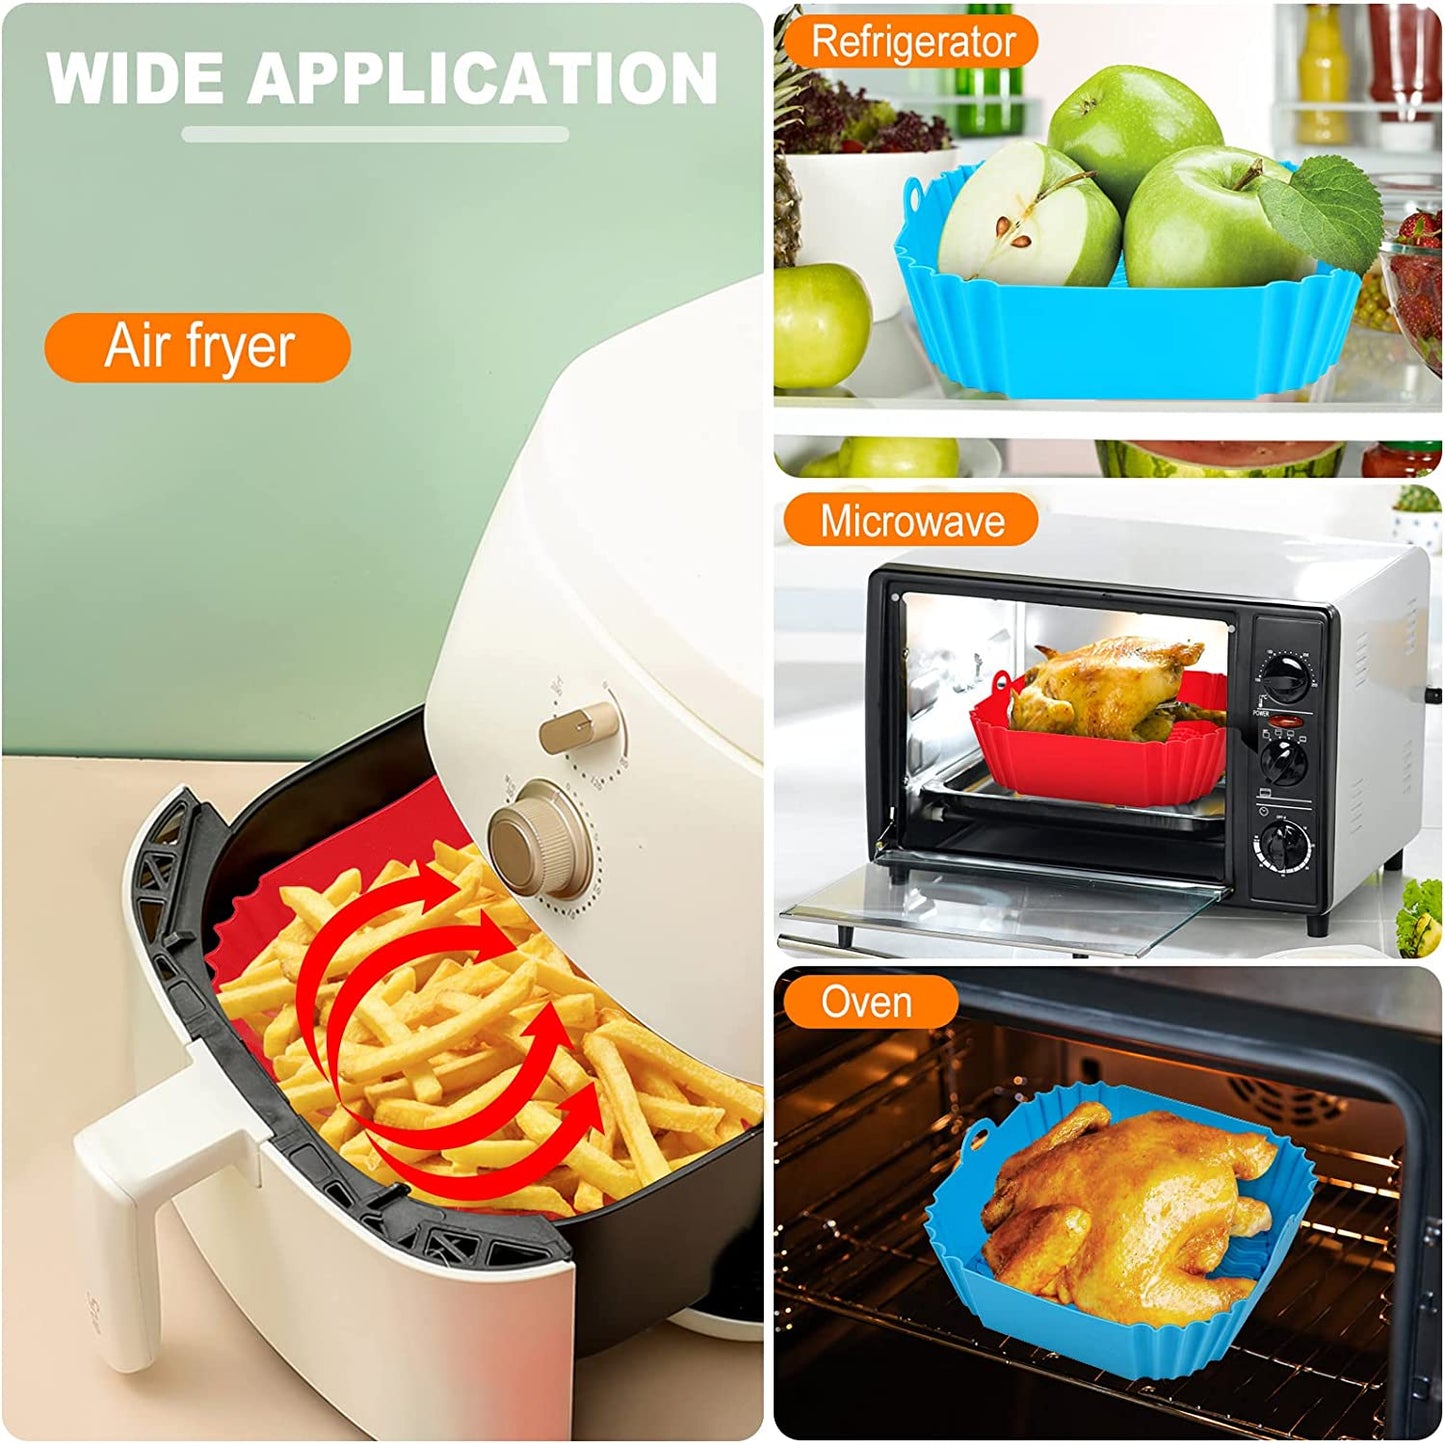 Square Silicone Air Fryer Liners - 8 Inch Reusable Air Fryer Pot - Air Fryer Accessories - Air Fryer Inserts for 4 to 7 QT Oven Microwave Accessories (Red + Blue)